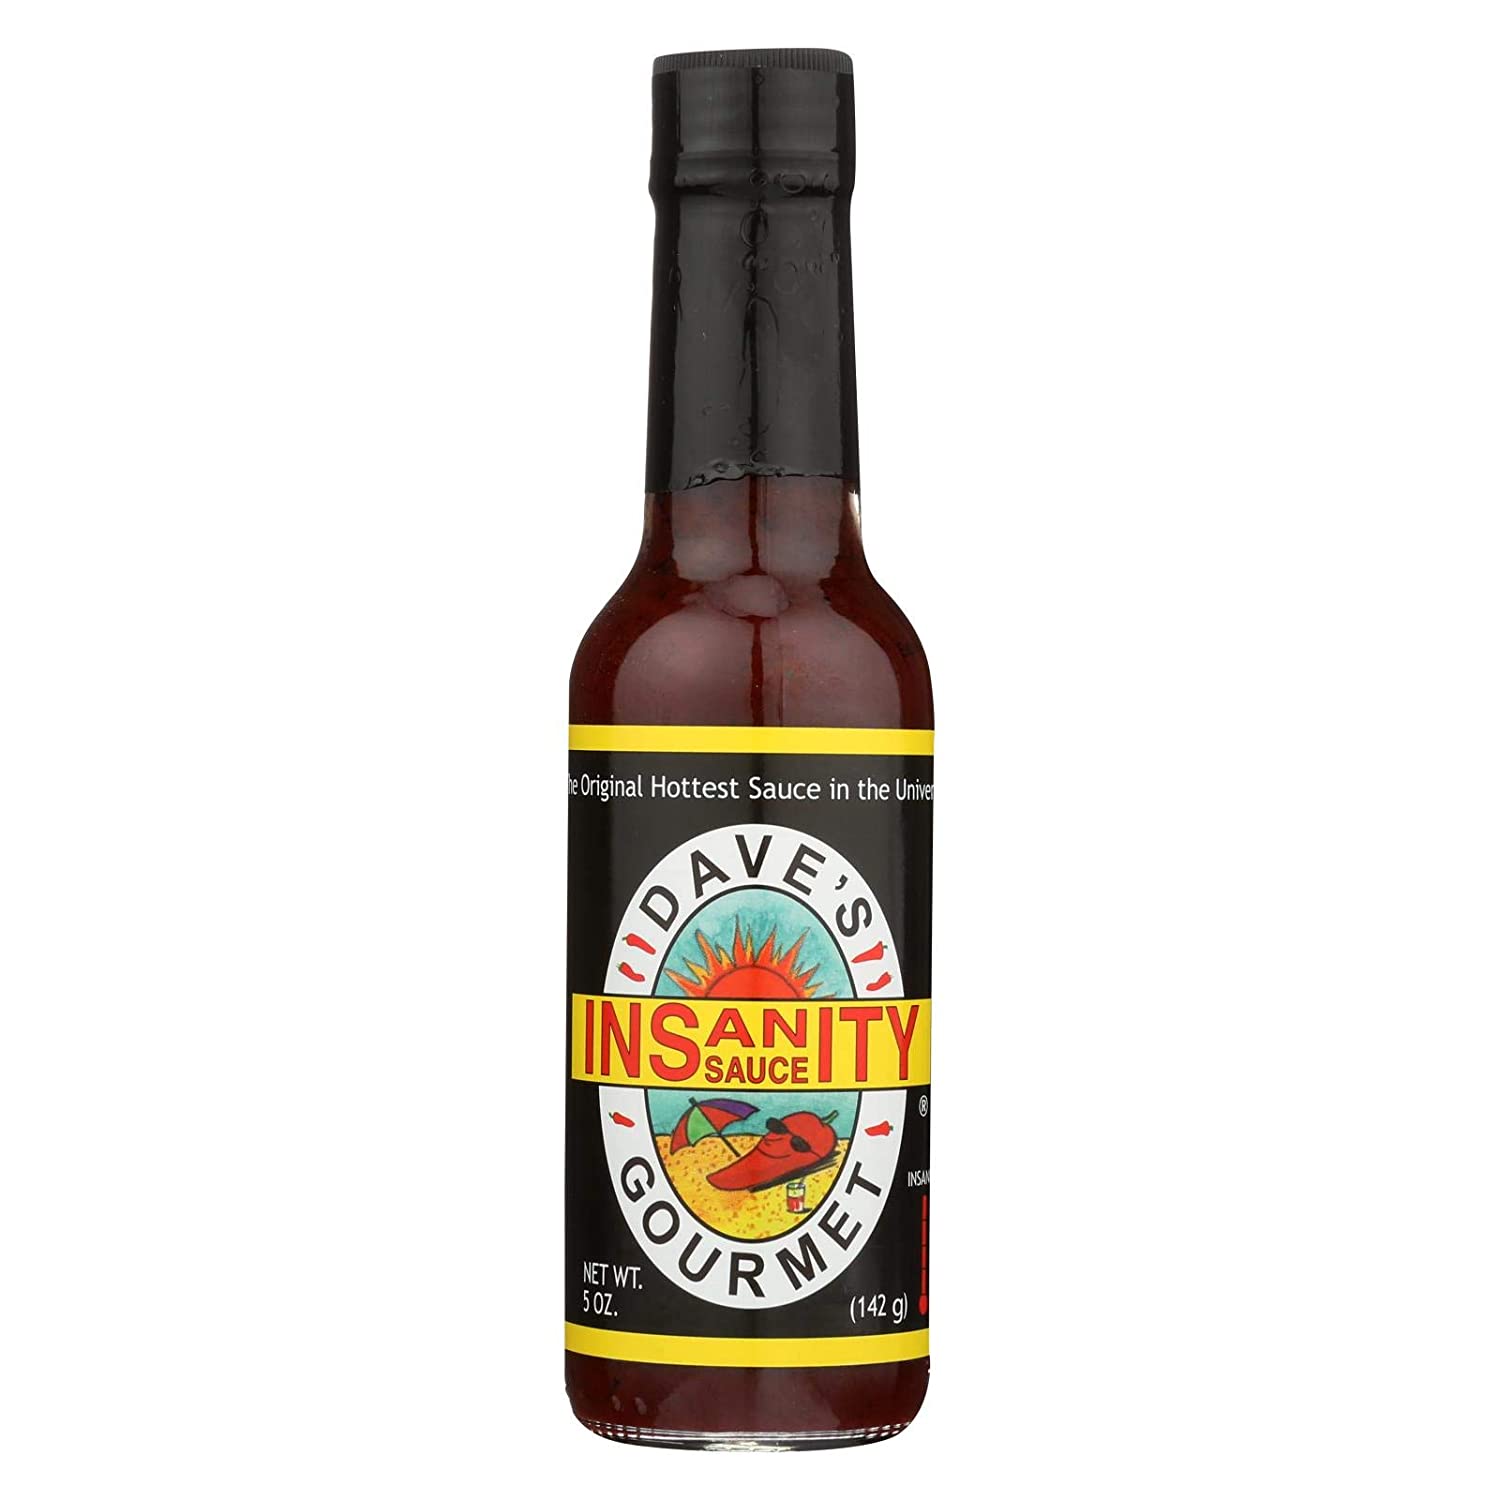 Go-To Hot Sauce: Dave’s Insanity Sauce